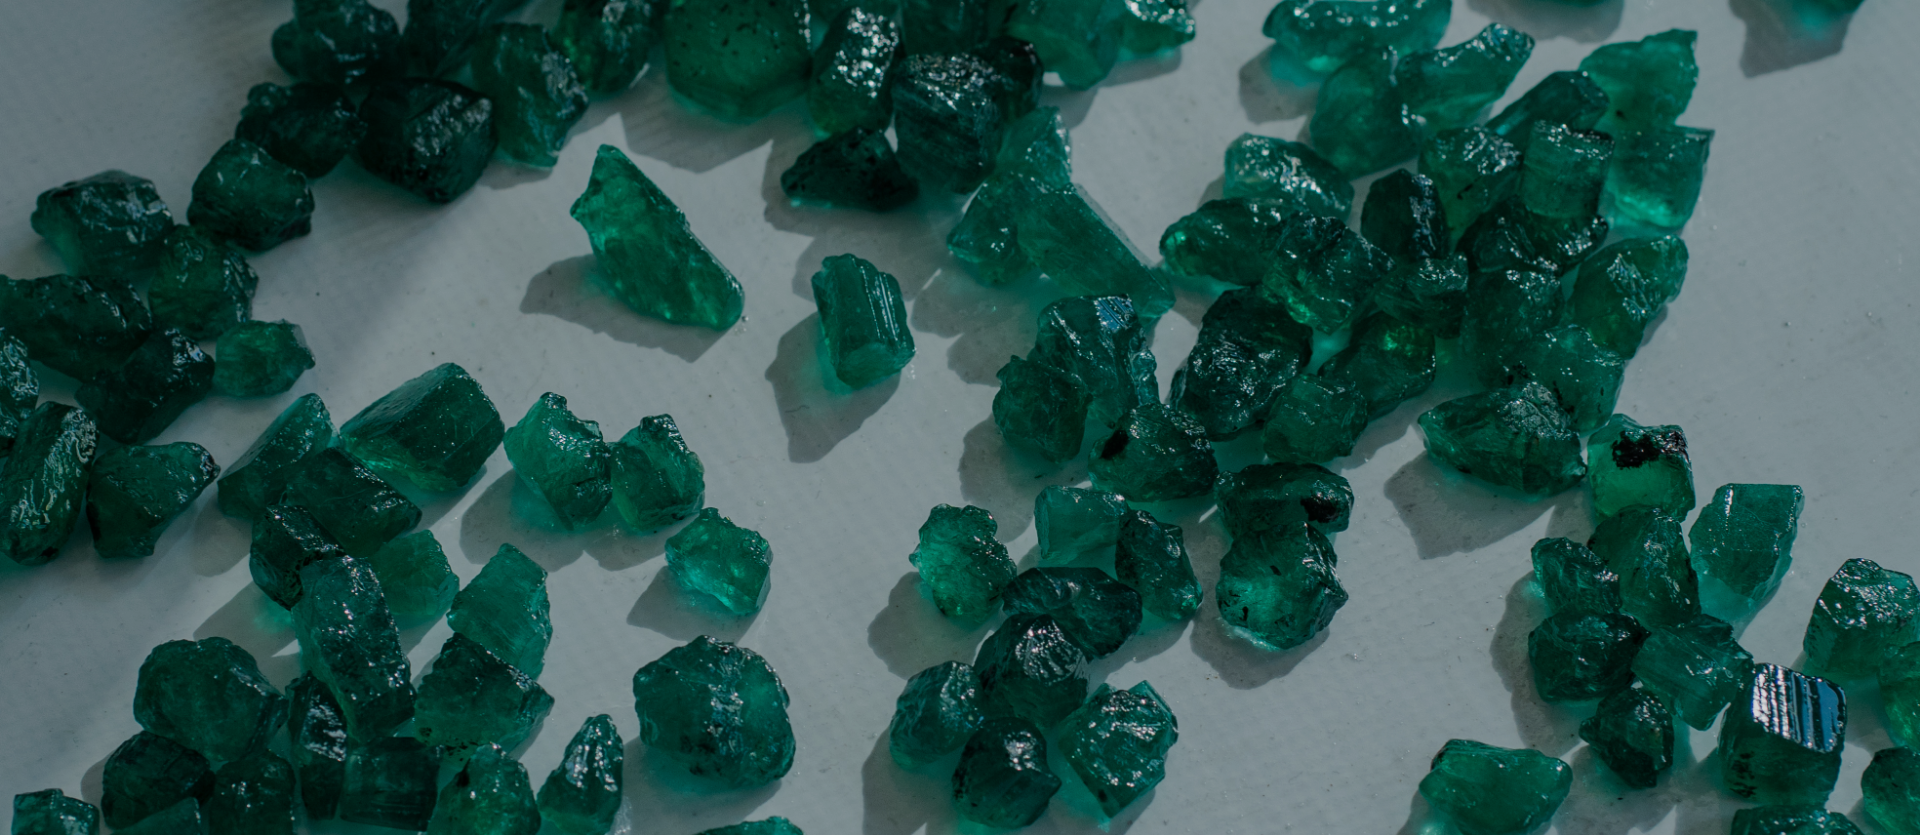 Make Your Dreams A Reality With Our Rare And Beautiful Emeralds